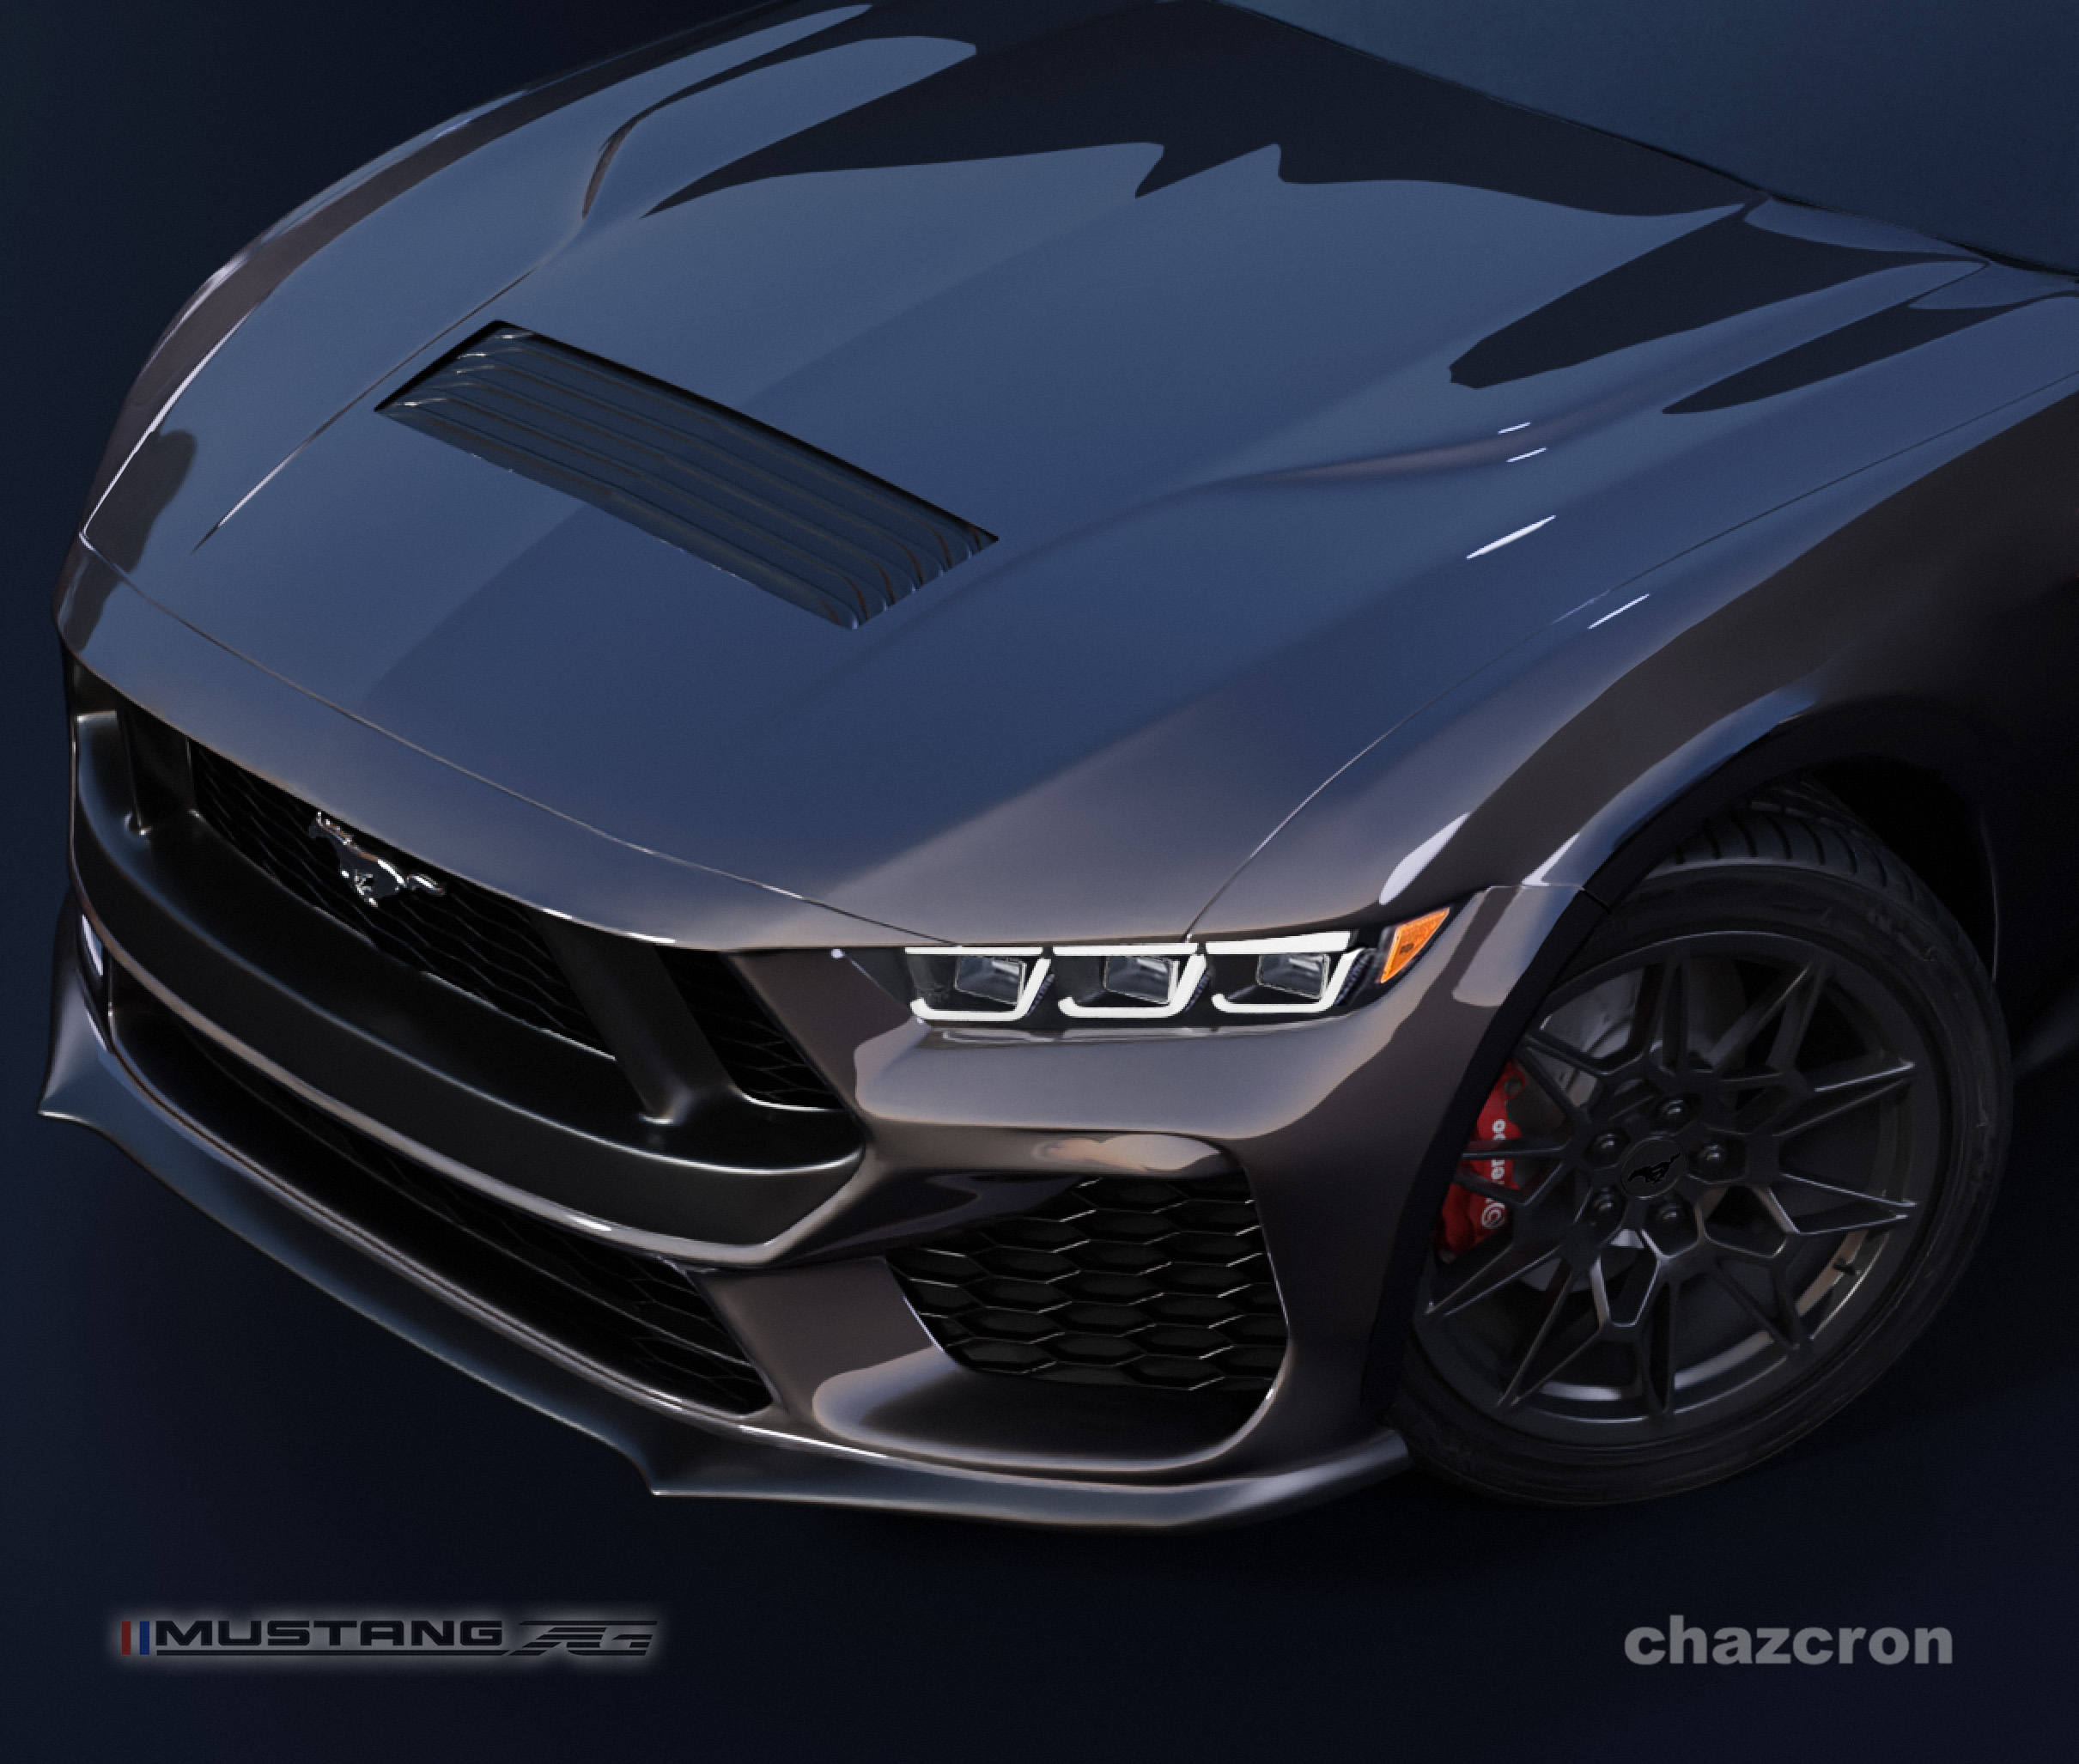 S650 Mustang chazcron weighs in... 7th gen 2023 Mustang S650 3D model & renderings in several colors! GreyRim